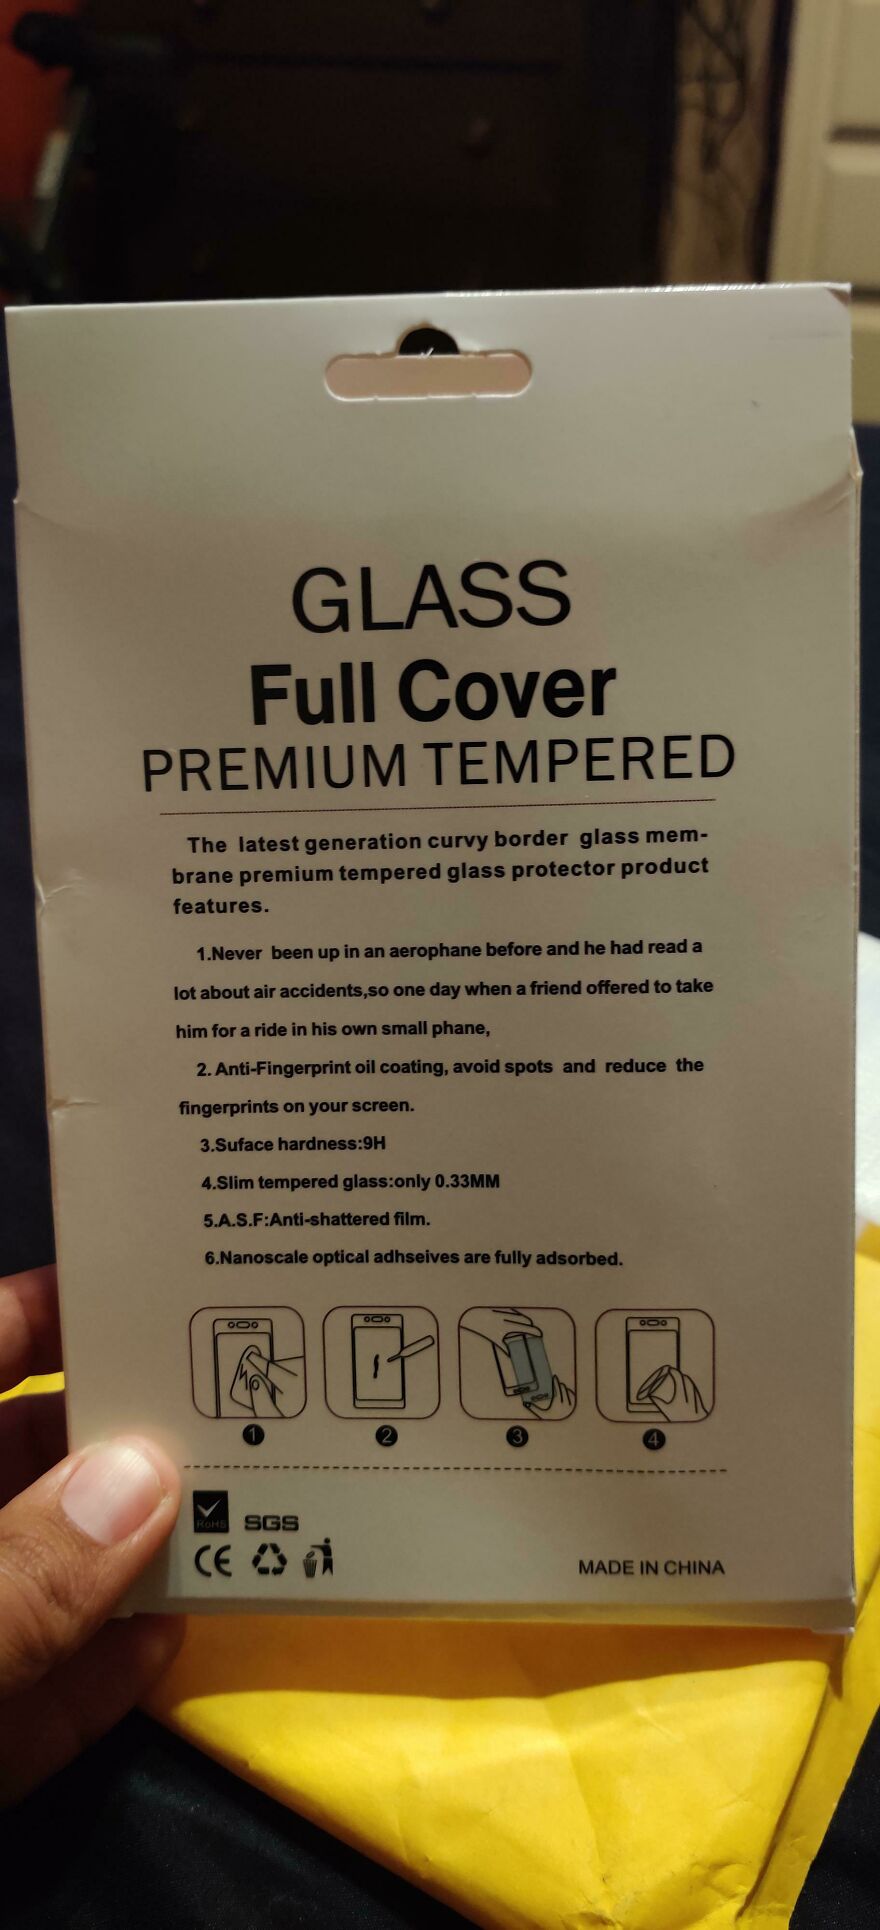 instructions unclear - Glass Full Cover Premium Tempered The latest generation curvy border glass mem brane premium tempered glass protector product features. 1.Never been up in an aerophane before and he had read a lot about air accidents,so one day when